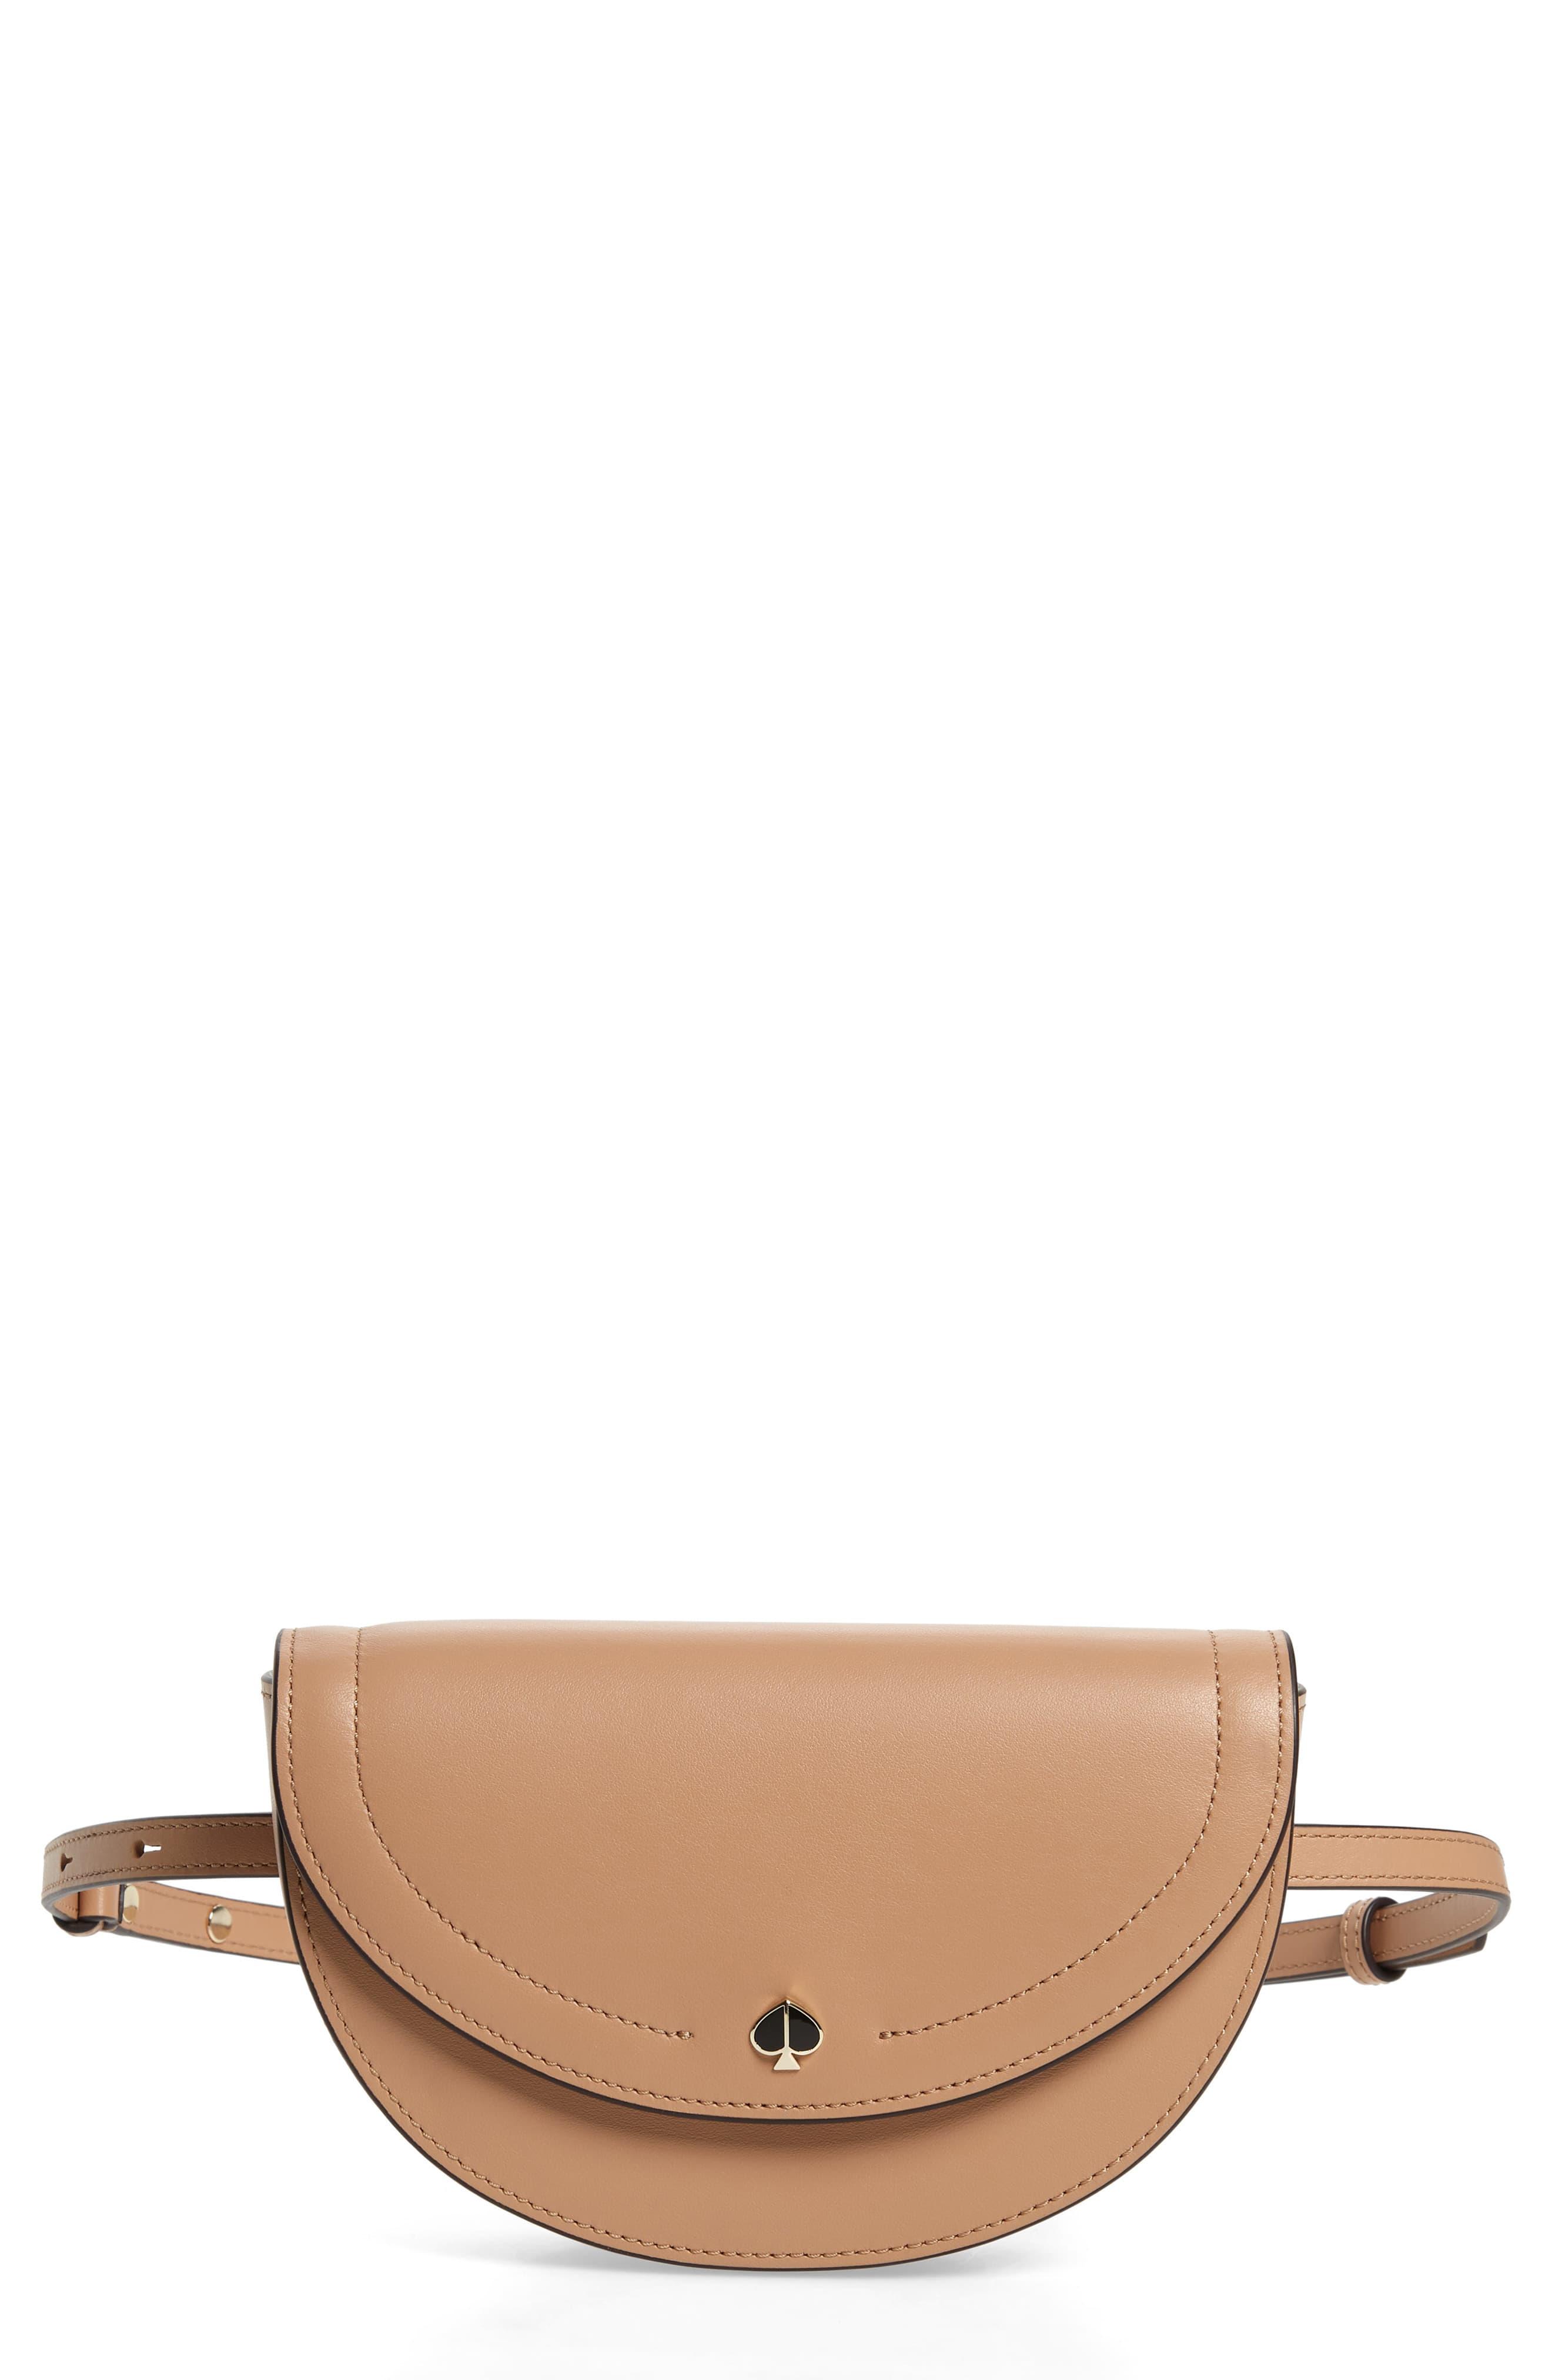 Kate Spade Small Andi Leather Belt Bag in Natural | Lyst